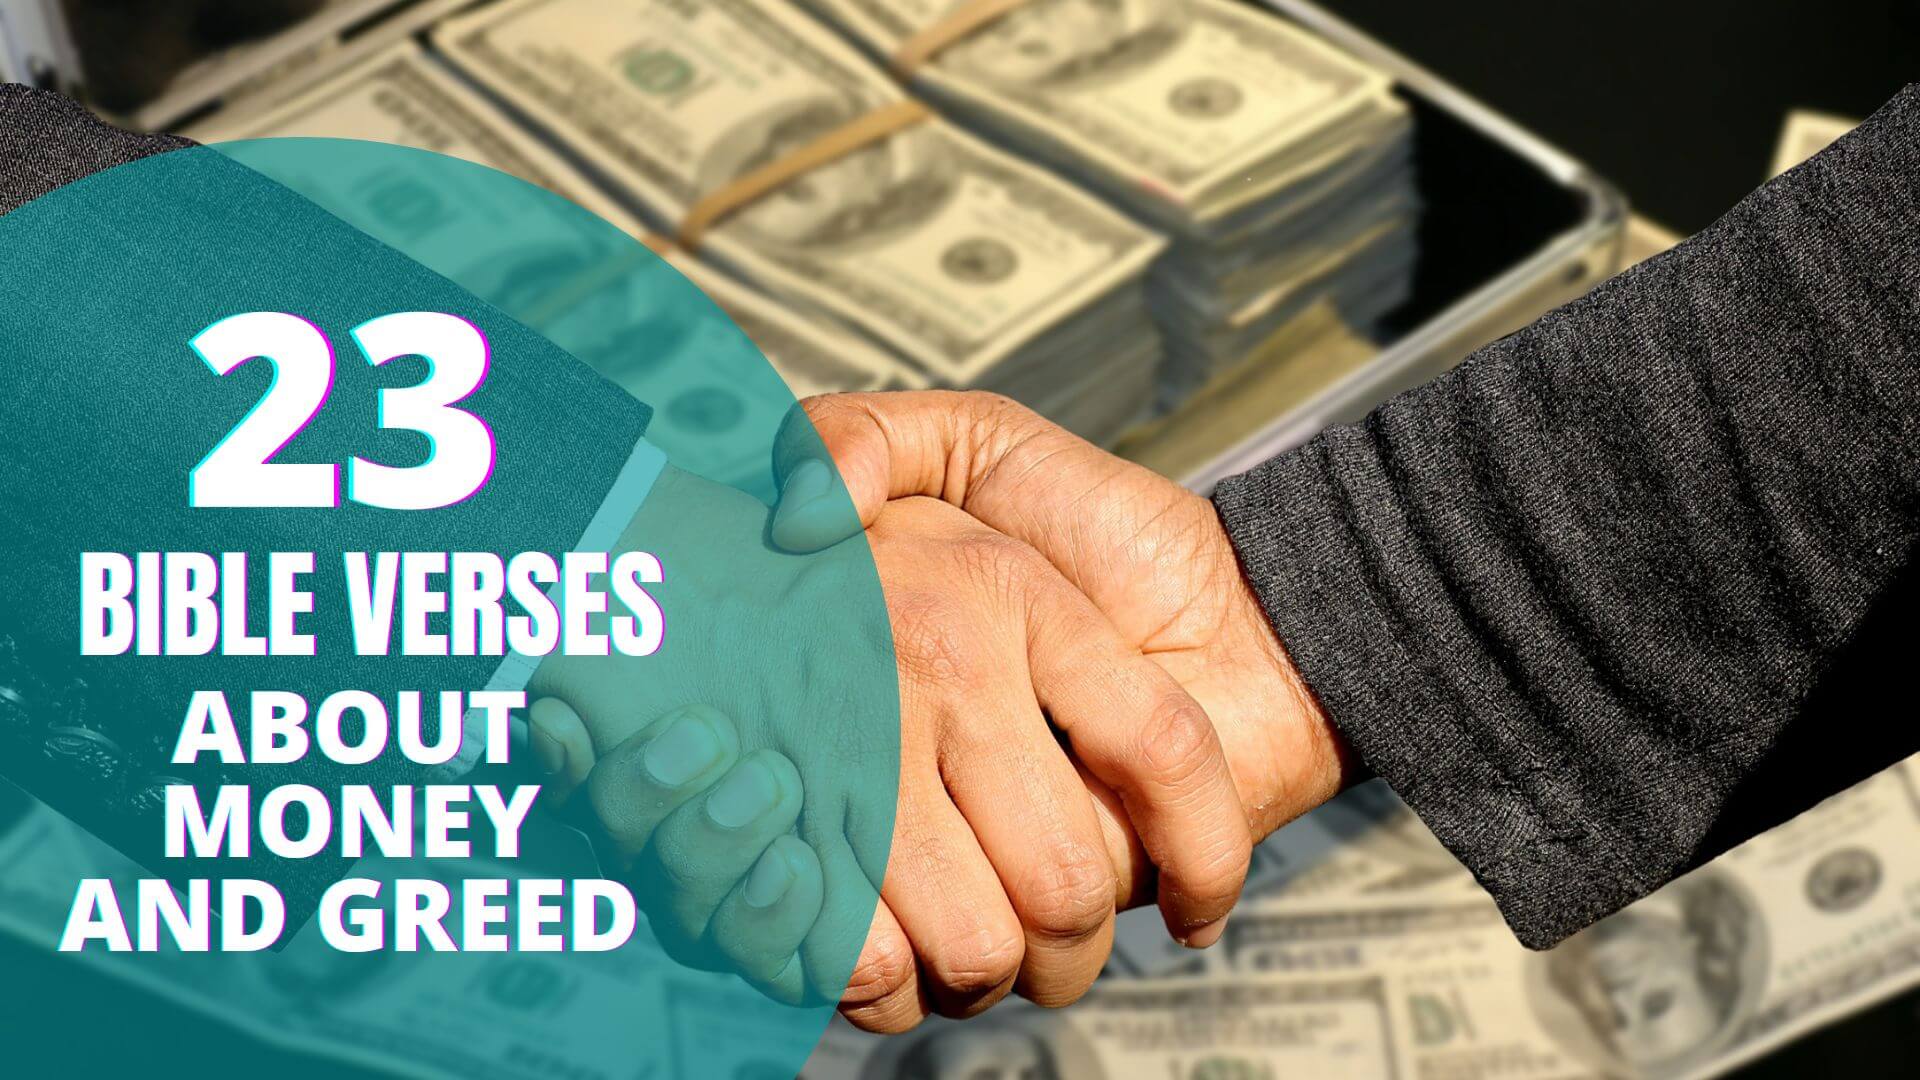 Bible verses about money and greed